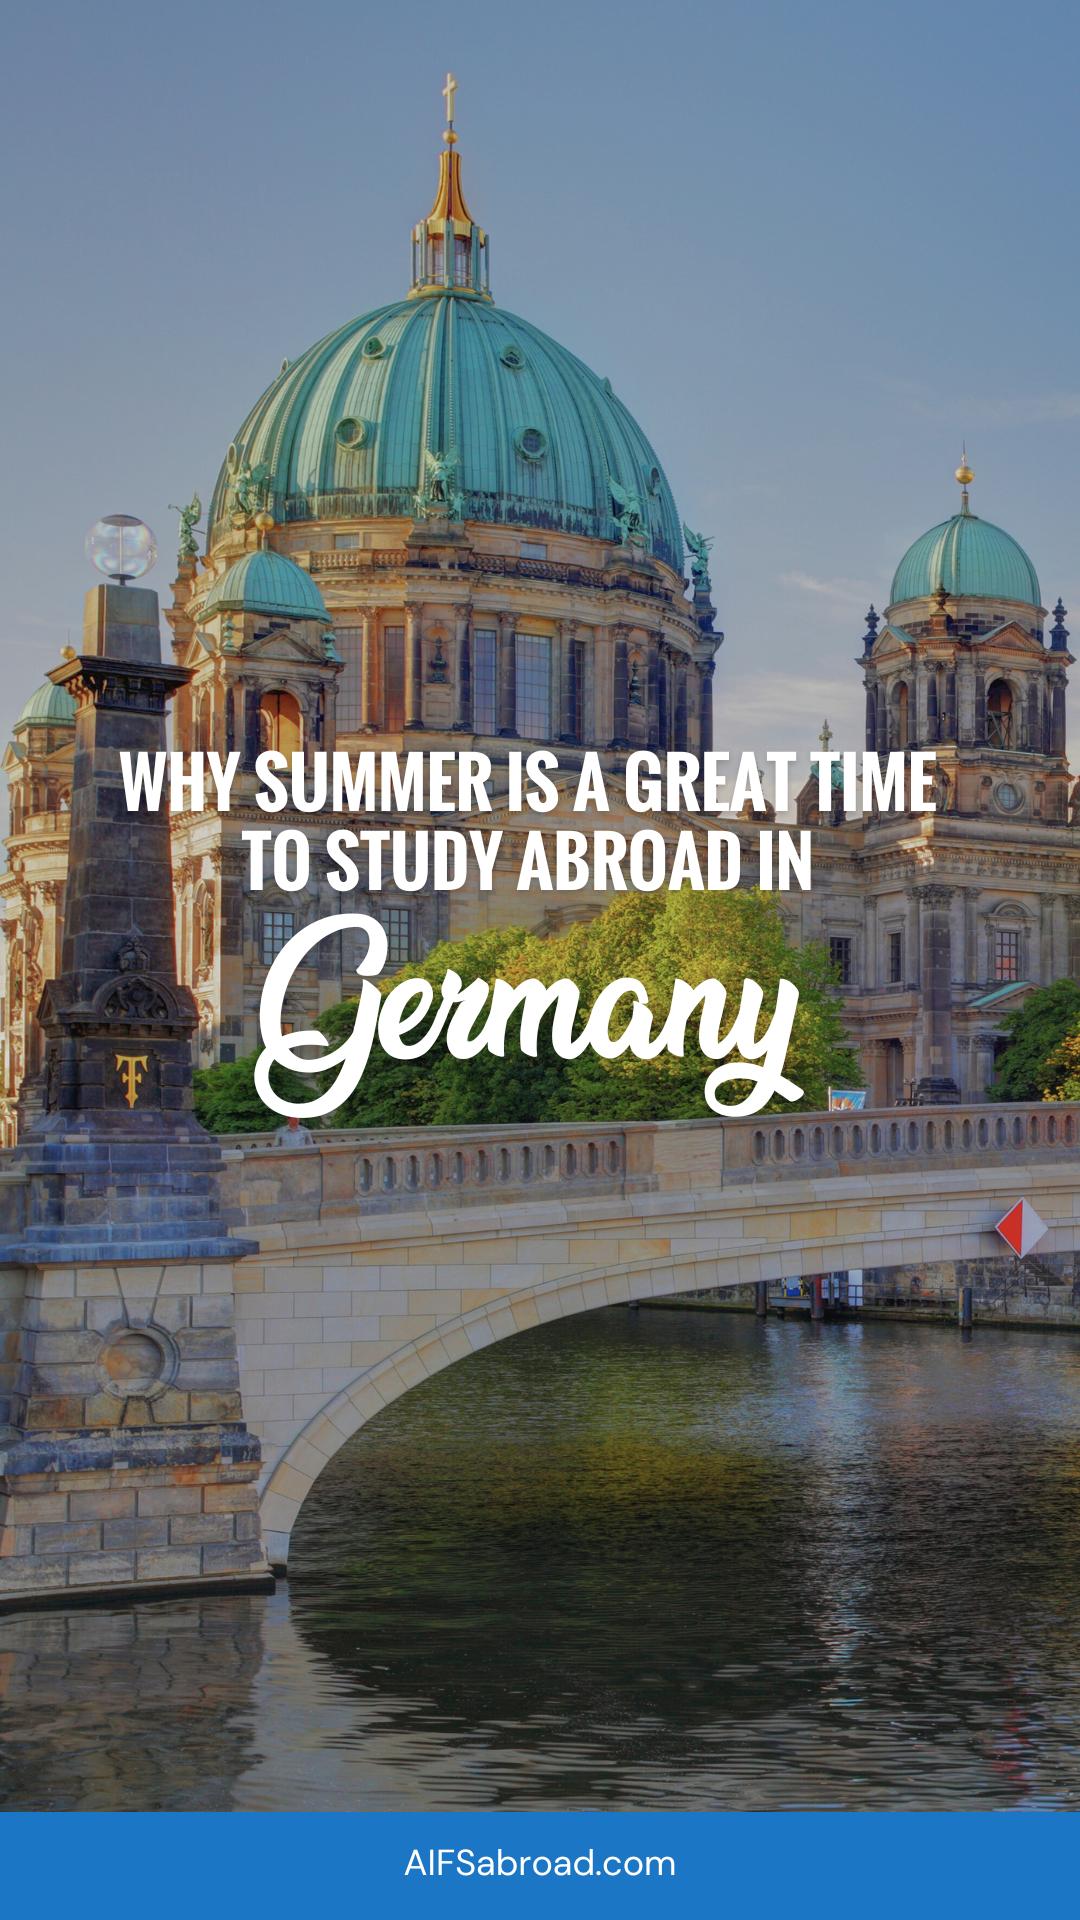 Pin image: Building in Berlin with text overlay, "Why Summer is a Great Time to Study Abroad in Germany"